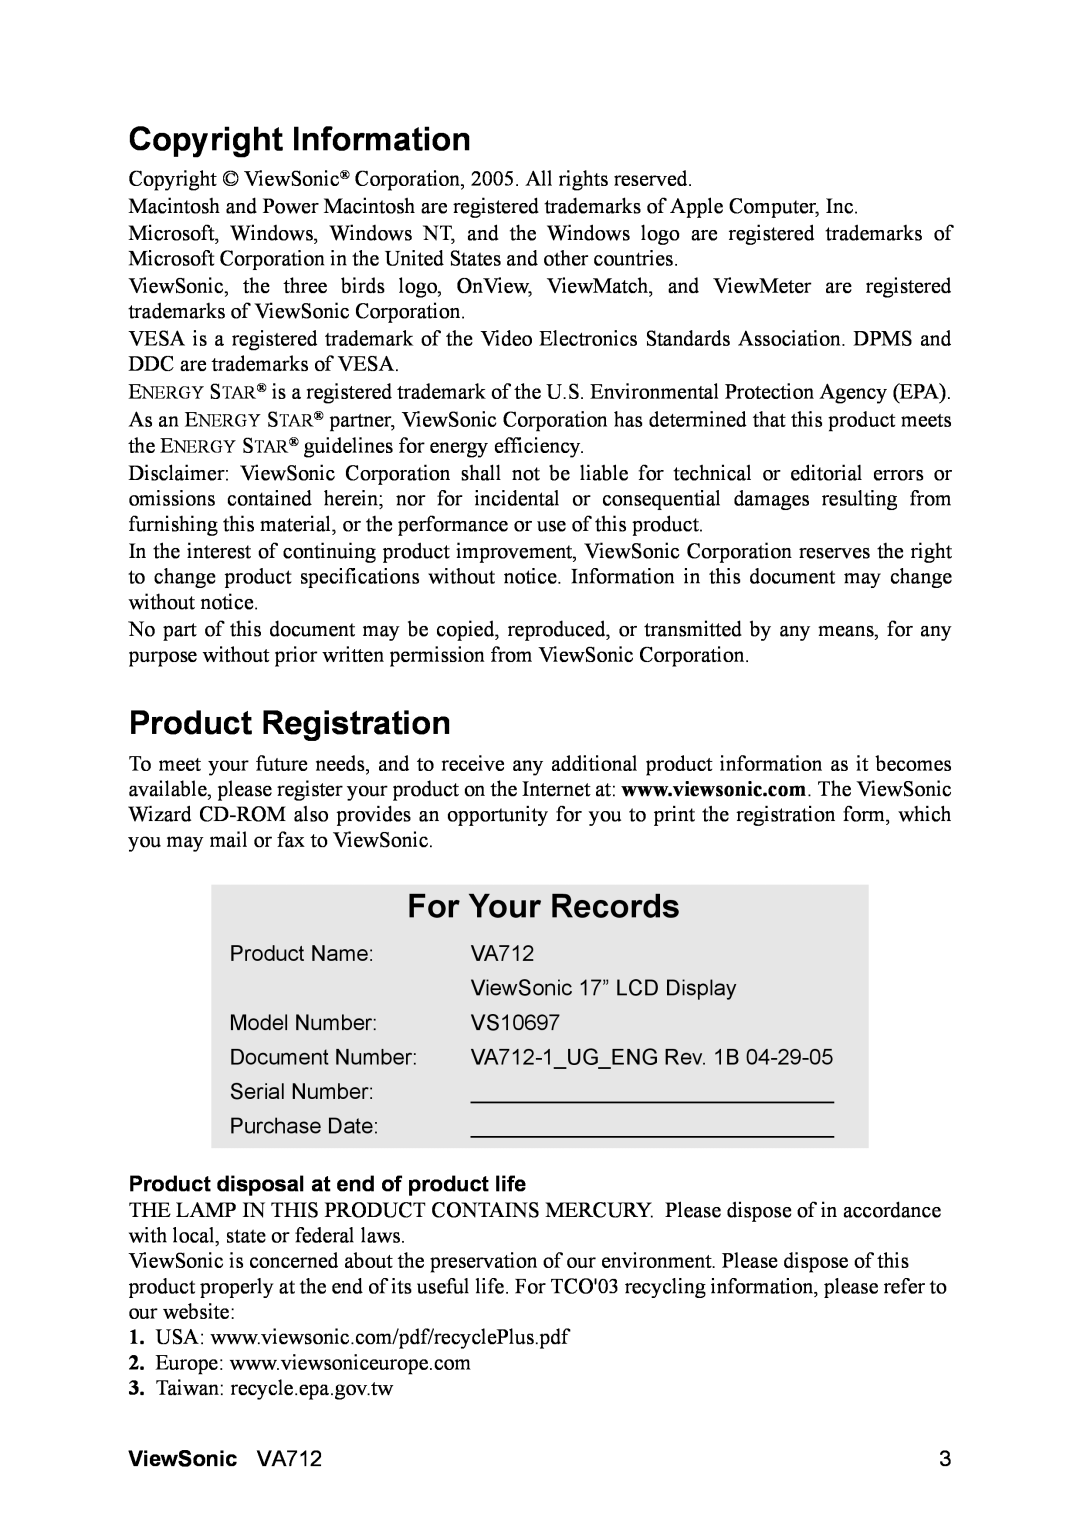 ViewSonic VA712 Copyright Information, Product Registration, For Your Records, Product disposal at end of product life 